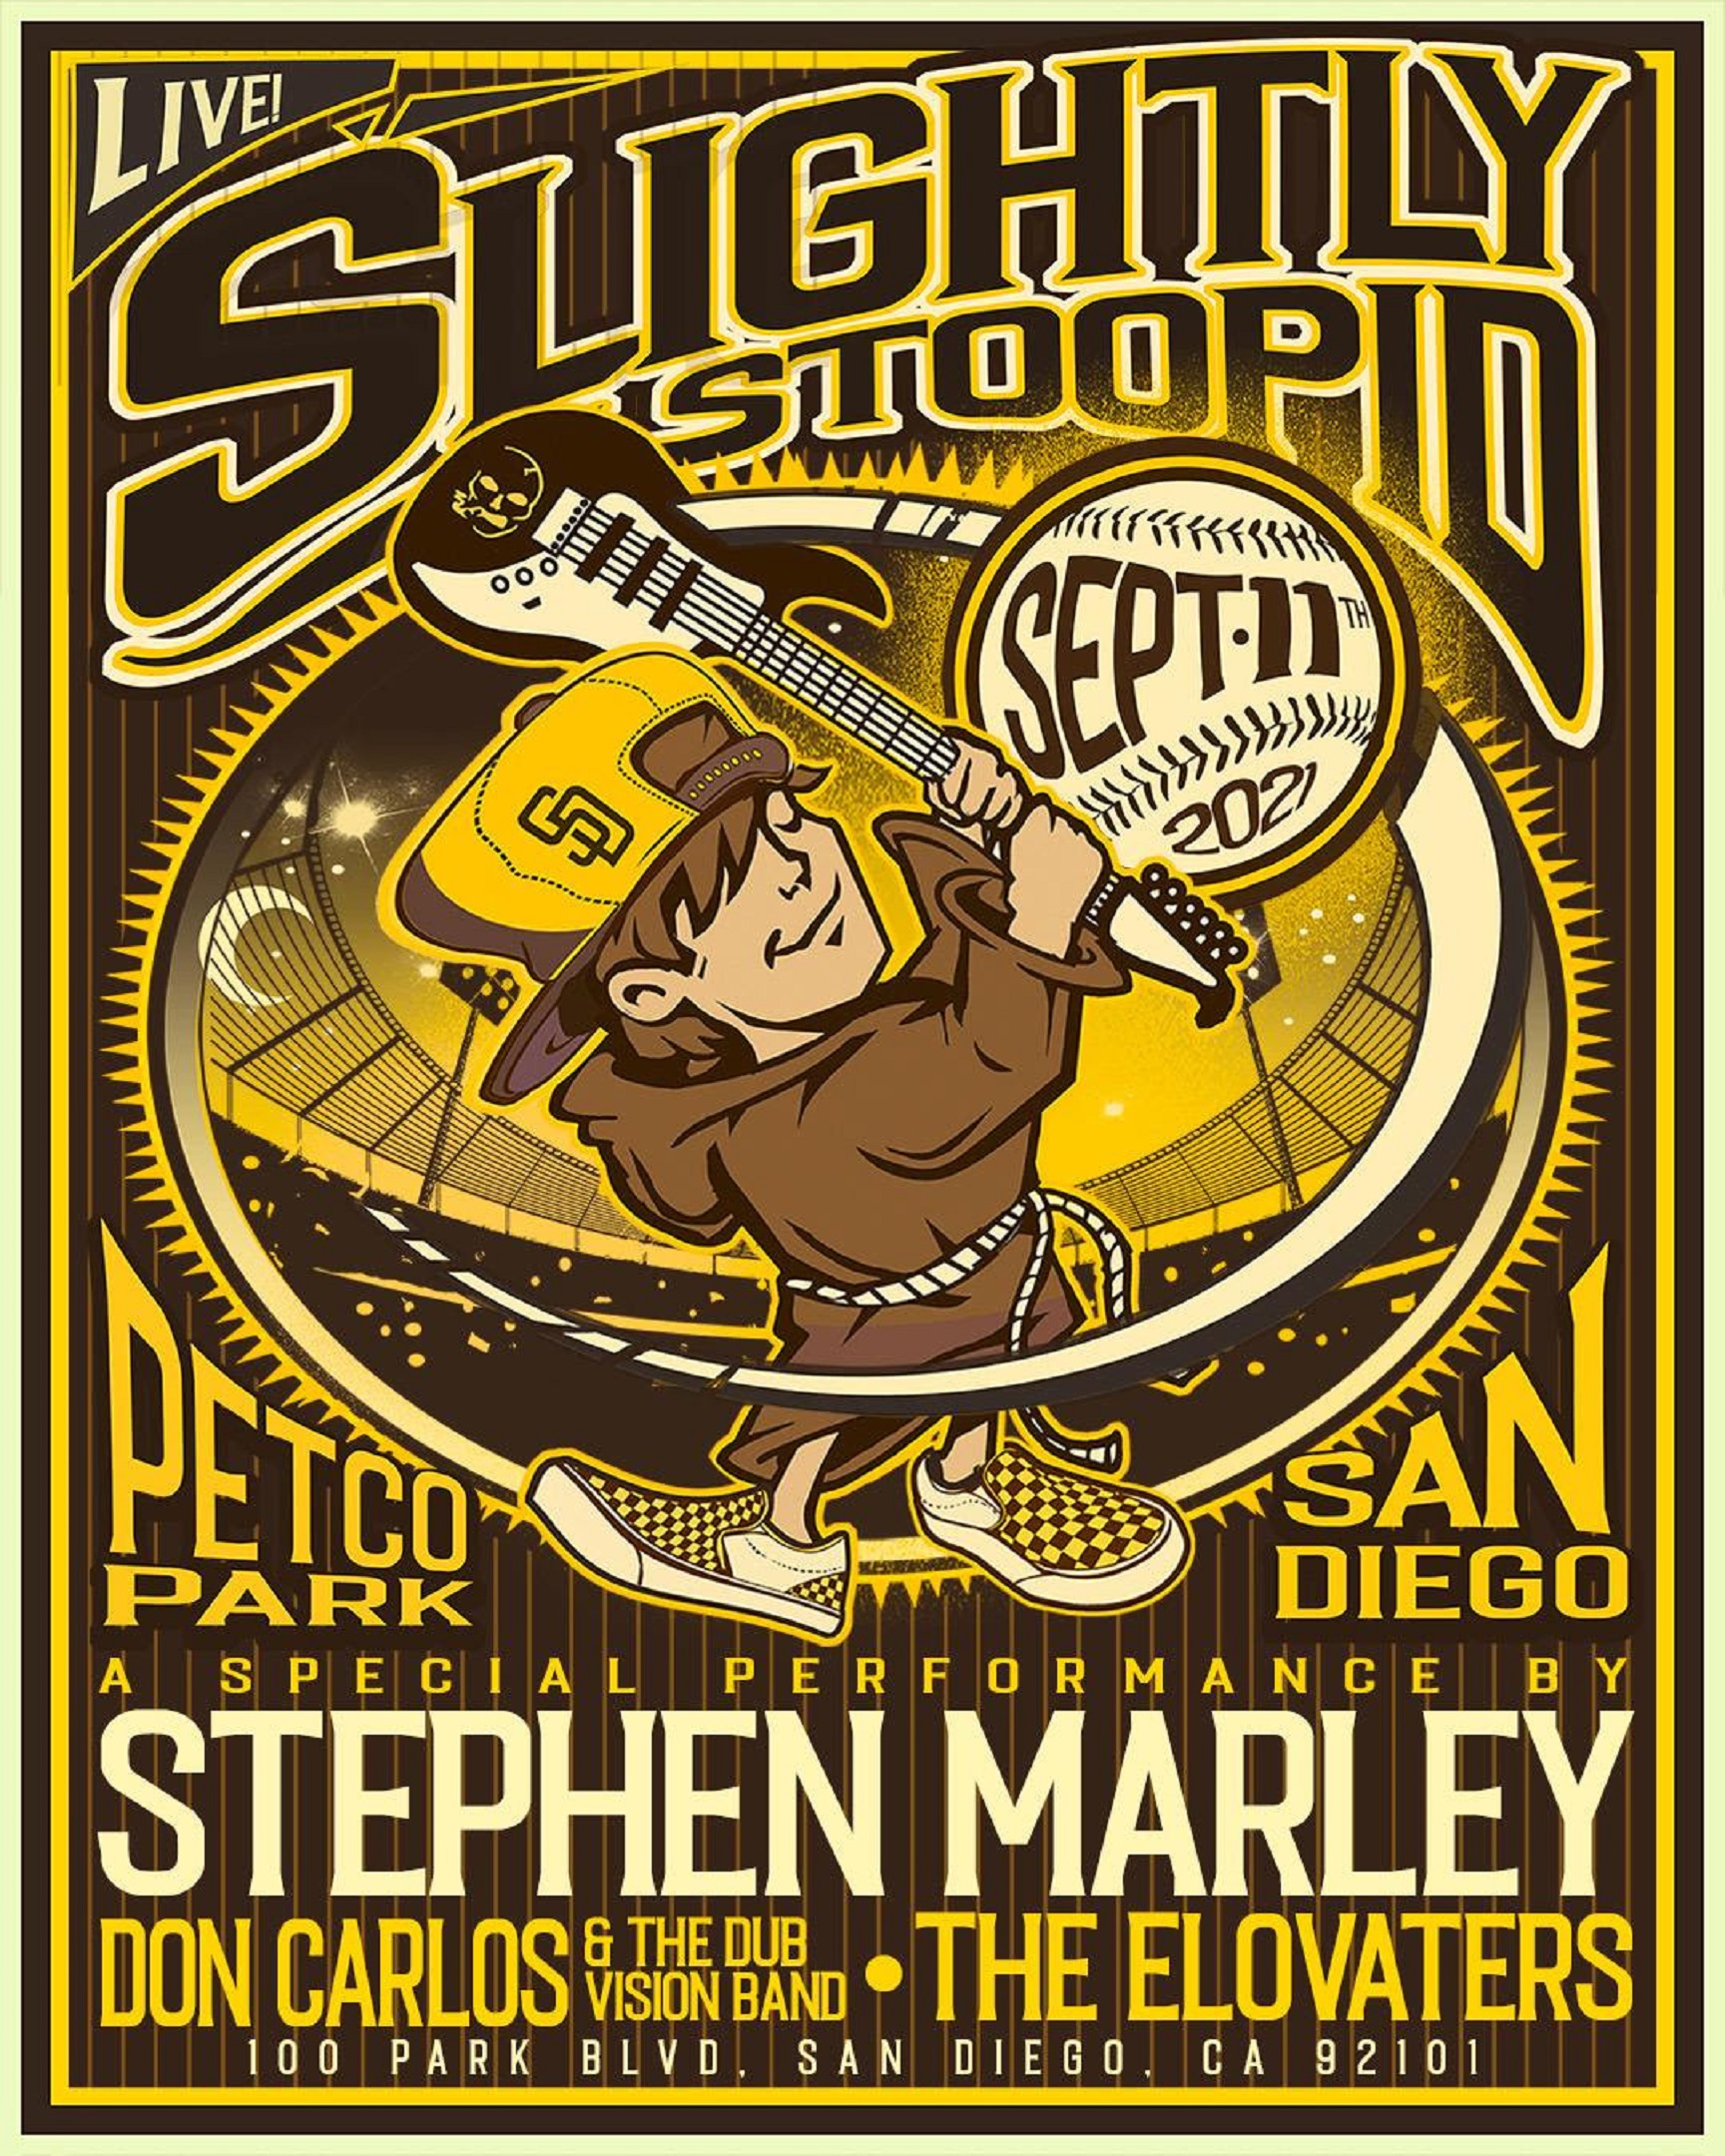 Slightly Stoopid Returns to San Diego for a Massive Hometown Show at Petco Park, Sept 11